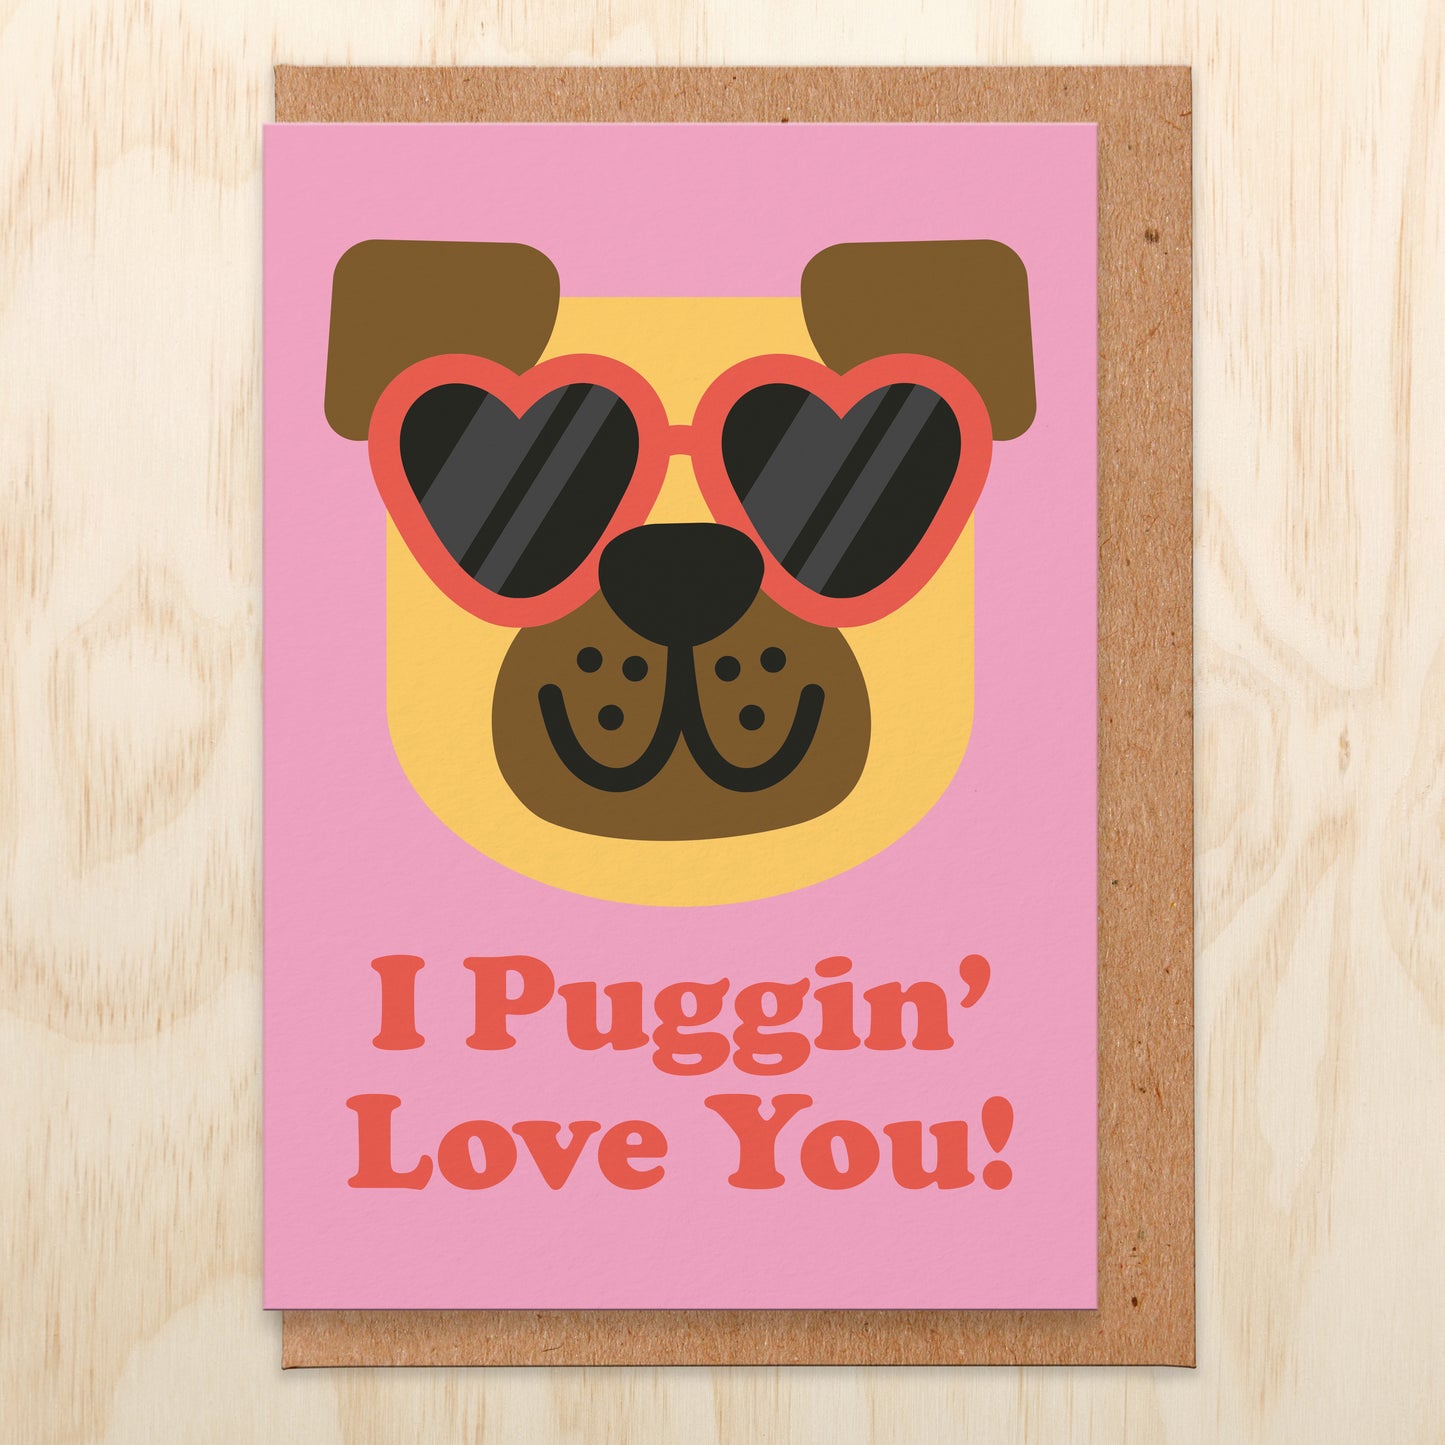 Love card that reads I puggin' love you! With an illustration of a pug wearing heart shaped sunglasses.